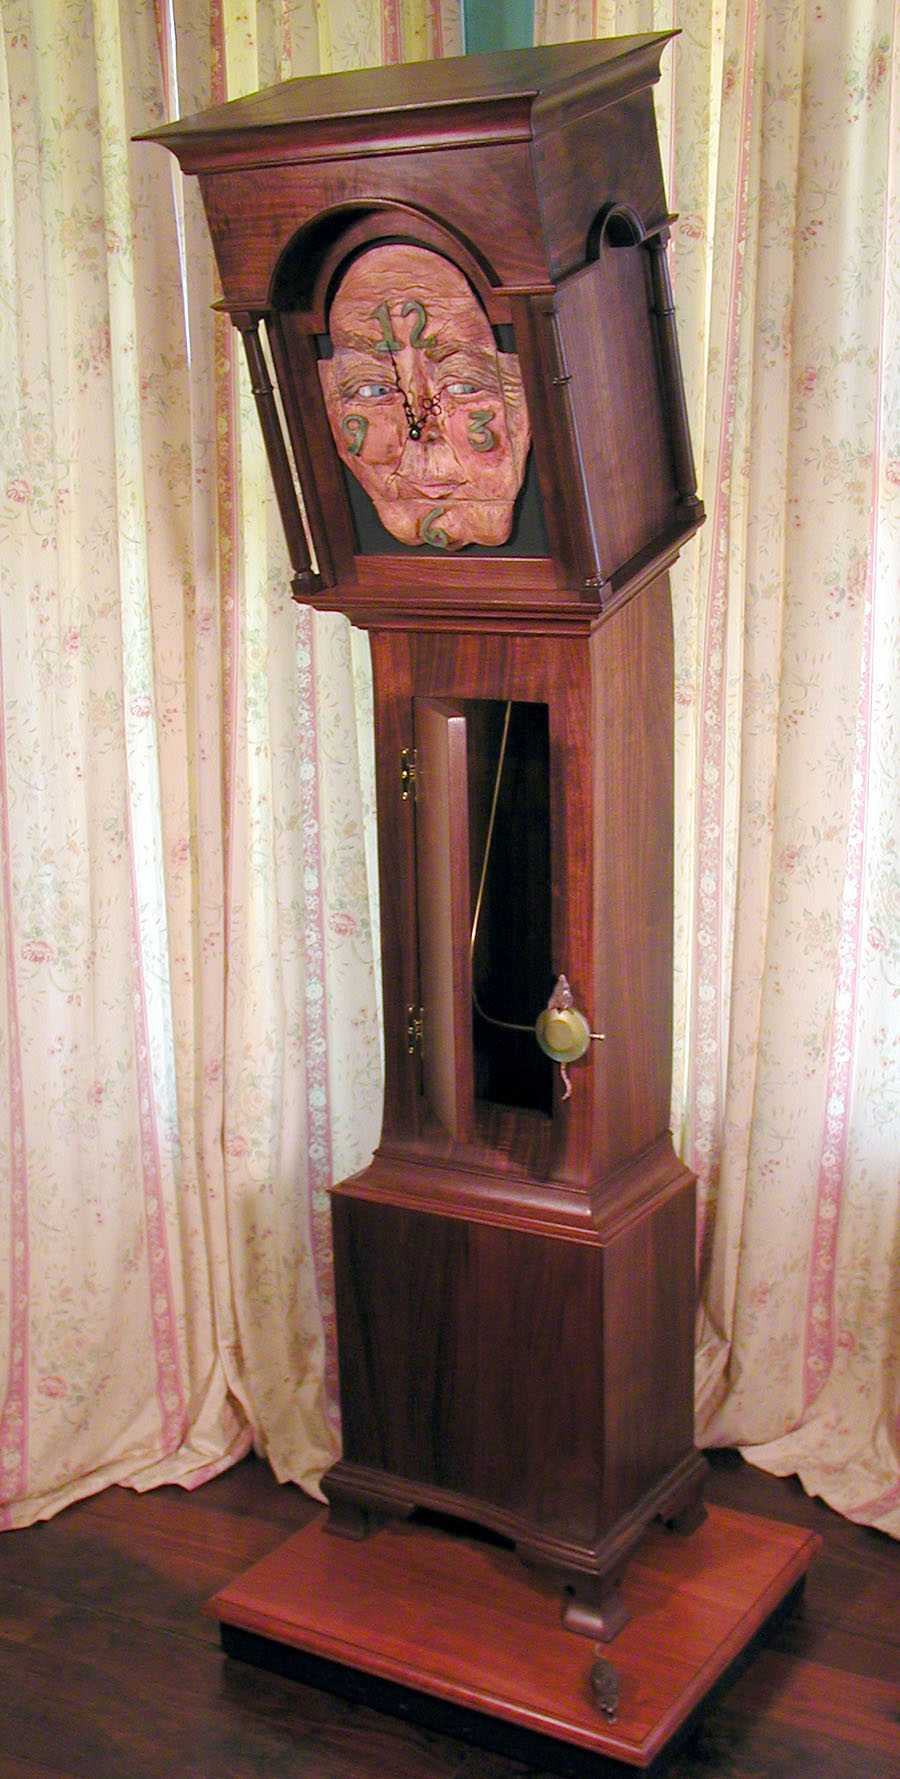 Hickory Dickory Clock by Jake Cress Furniture Maker at CustomMade.com